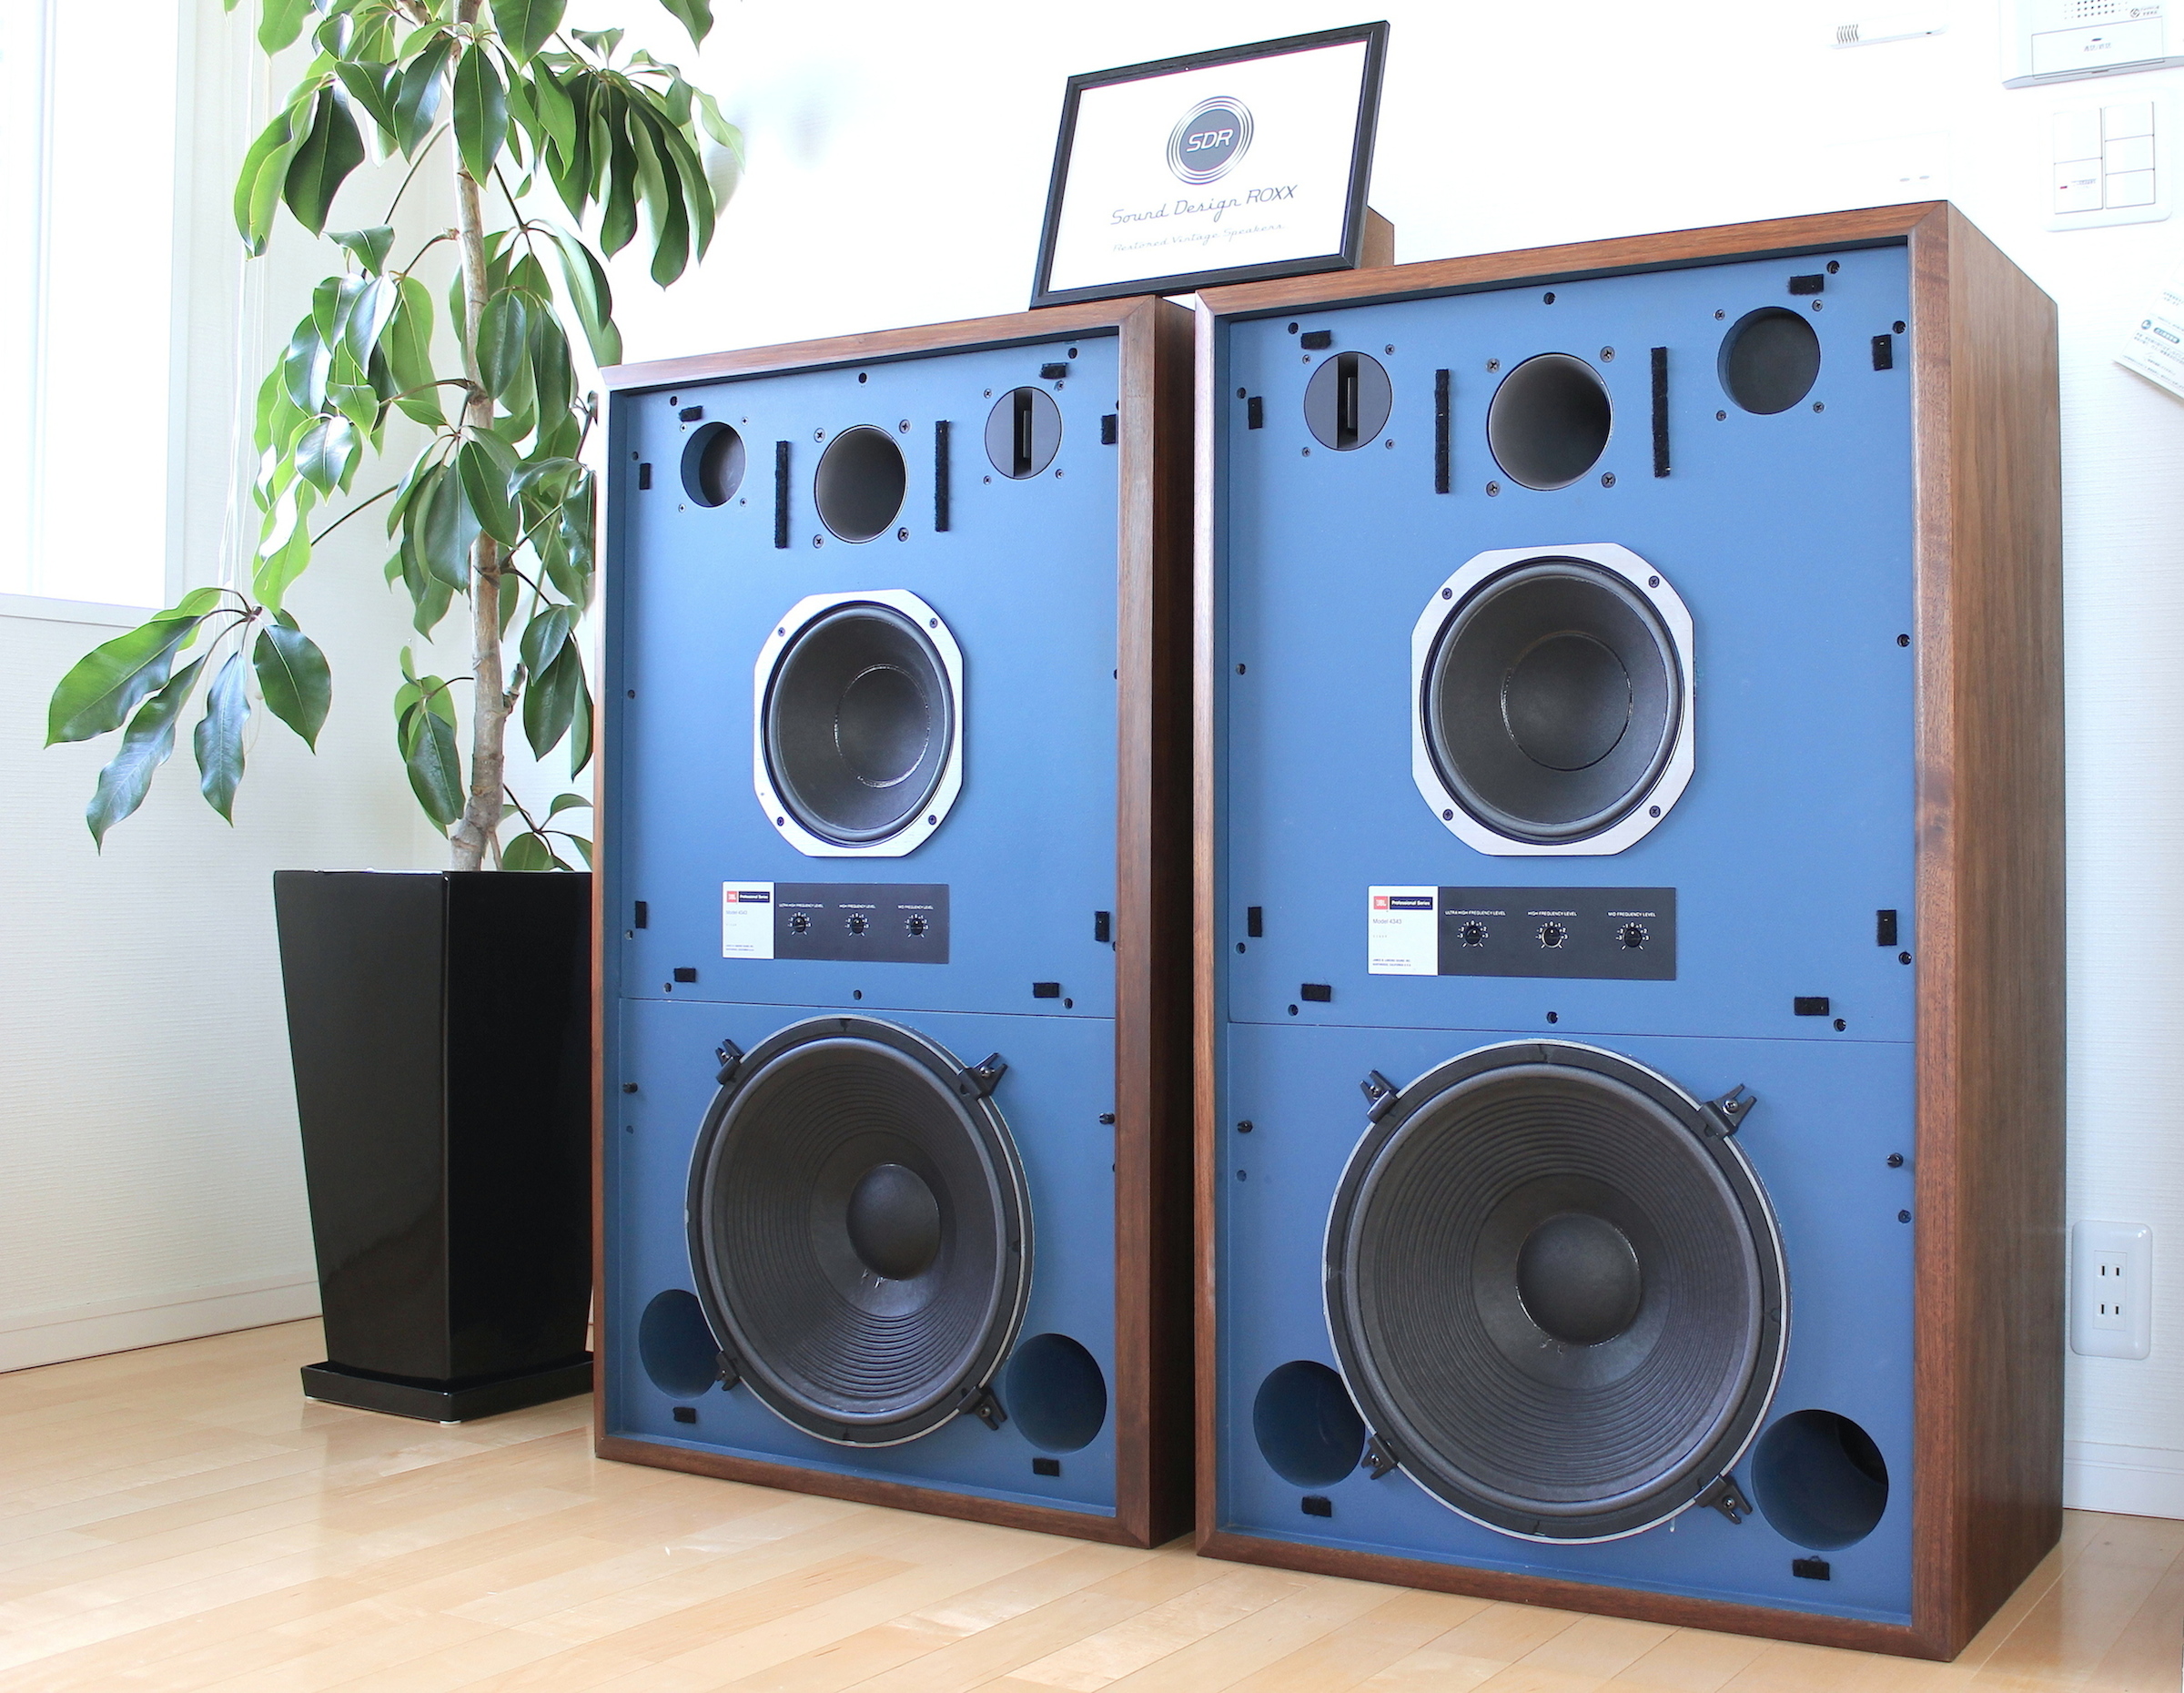 You are currently viewing 最近のJBL・TANNOY・ALTECなど中古・ヴィンテージスピーカーの修理や販売のあれこれ　ロックスヴィンテージスピーカーズ